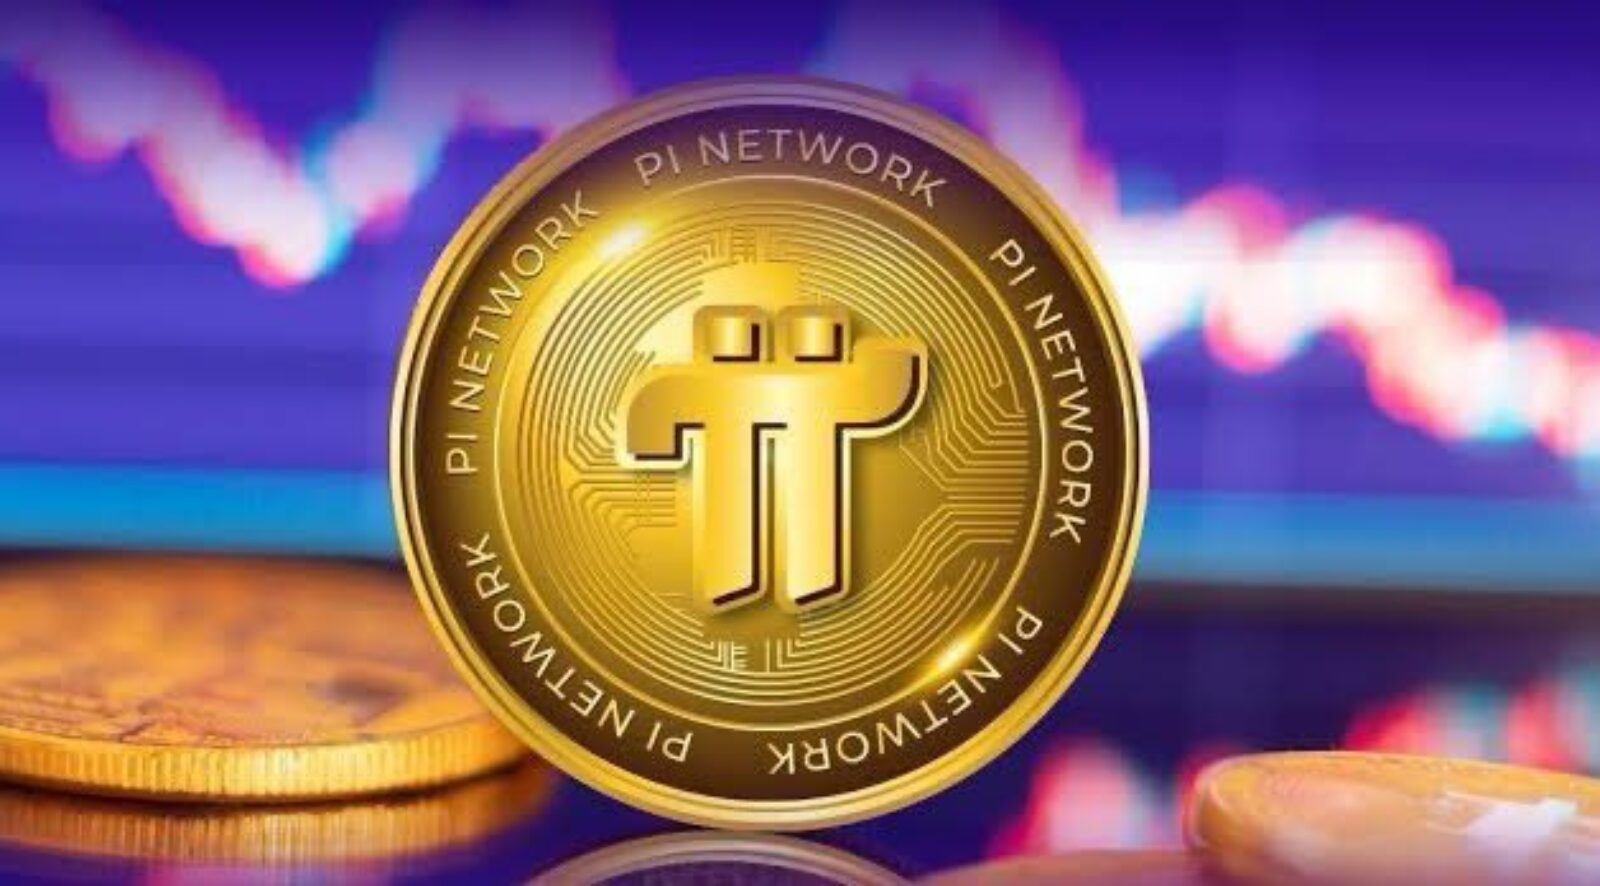 How Much Is Pi Coin Worth?